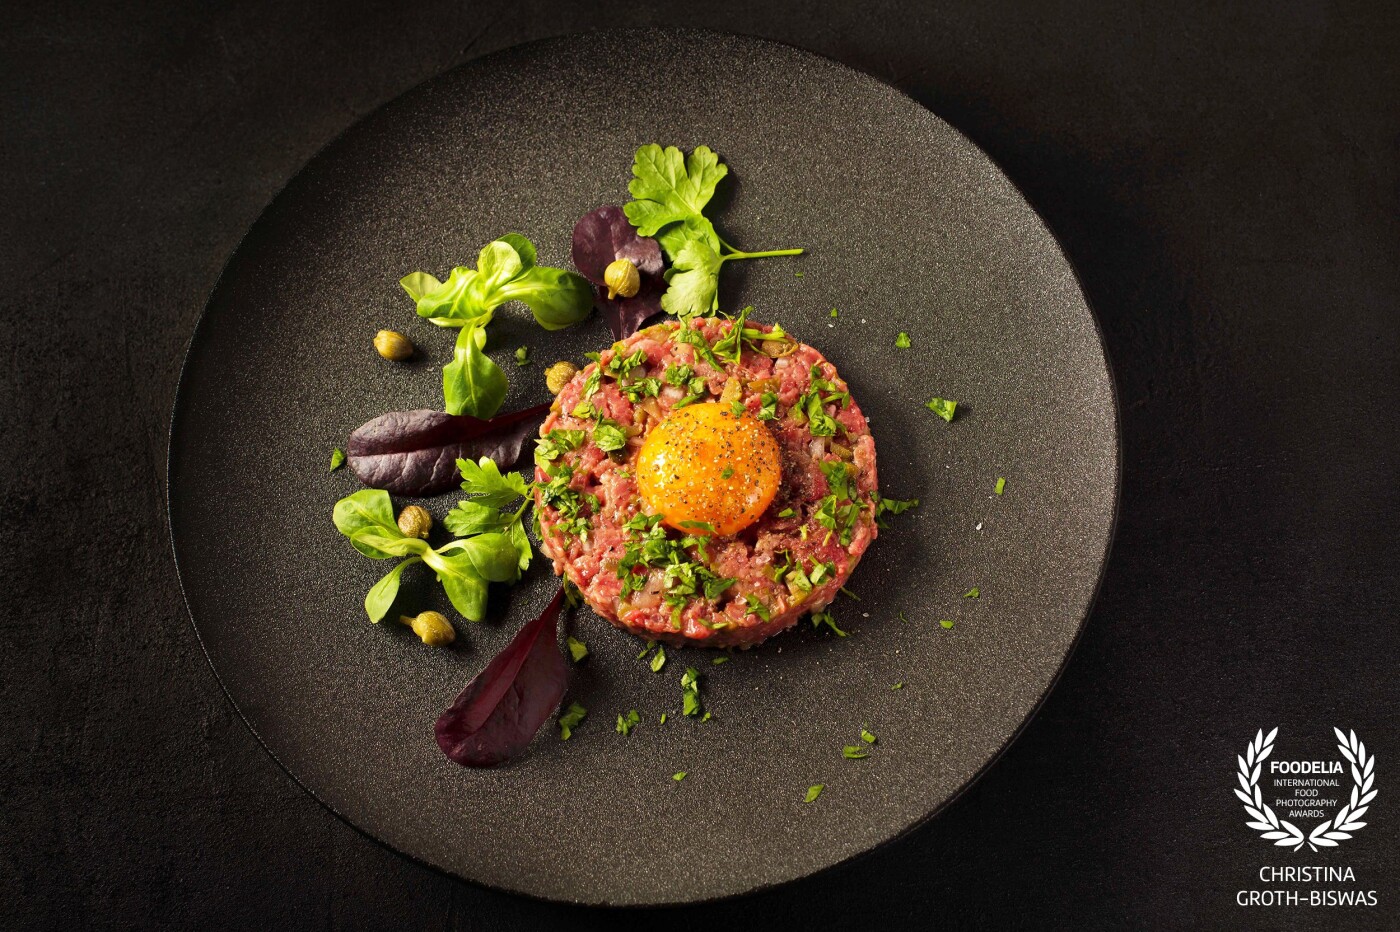 Steak tartare, served with some simple greens on the side. This is one of my favourite dishes using only the freshest ingredients considering it is raw.